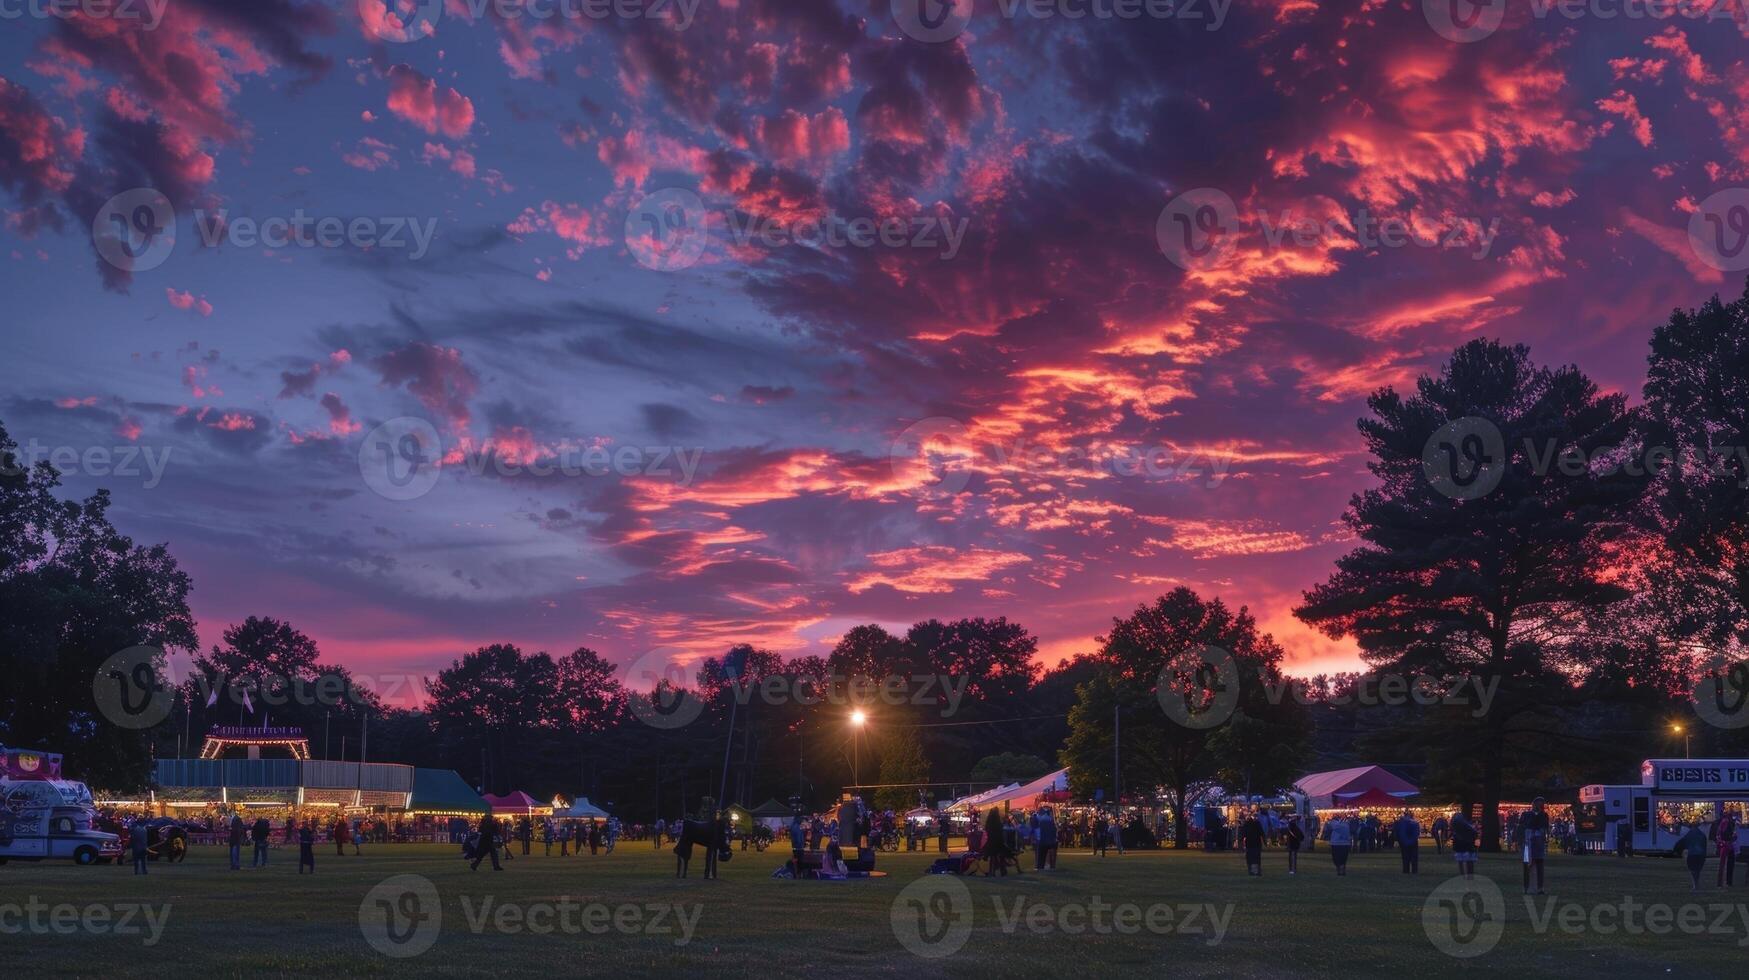 As the evening progresses the sky transforms into a breathtaking mix of pinks oranges and purples creating a picturesque background for fairgoers to capture memories photo